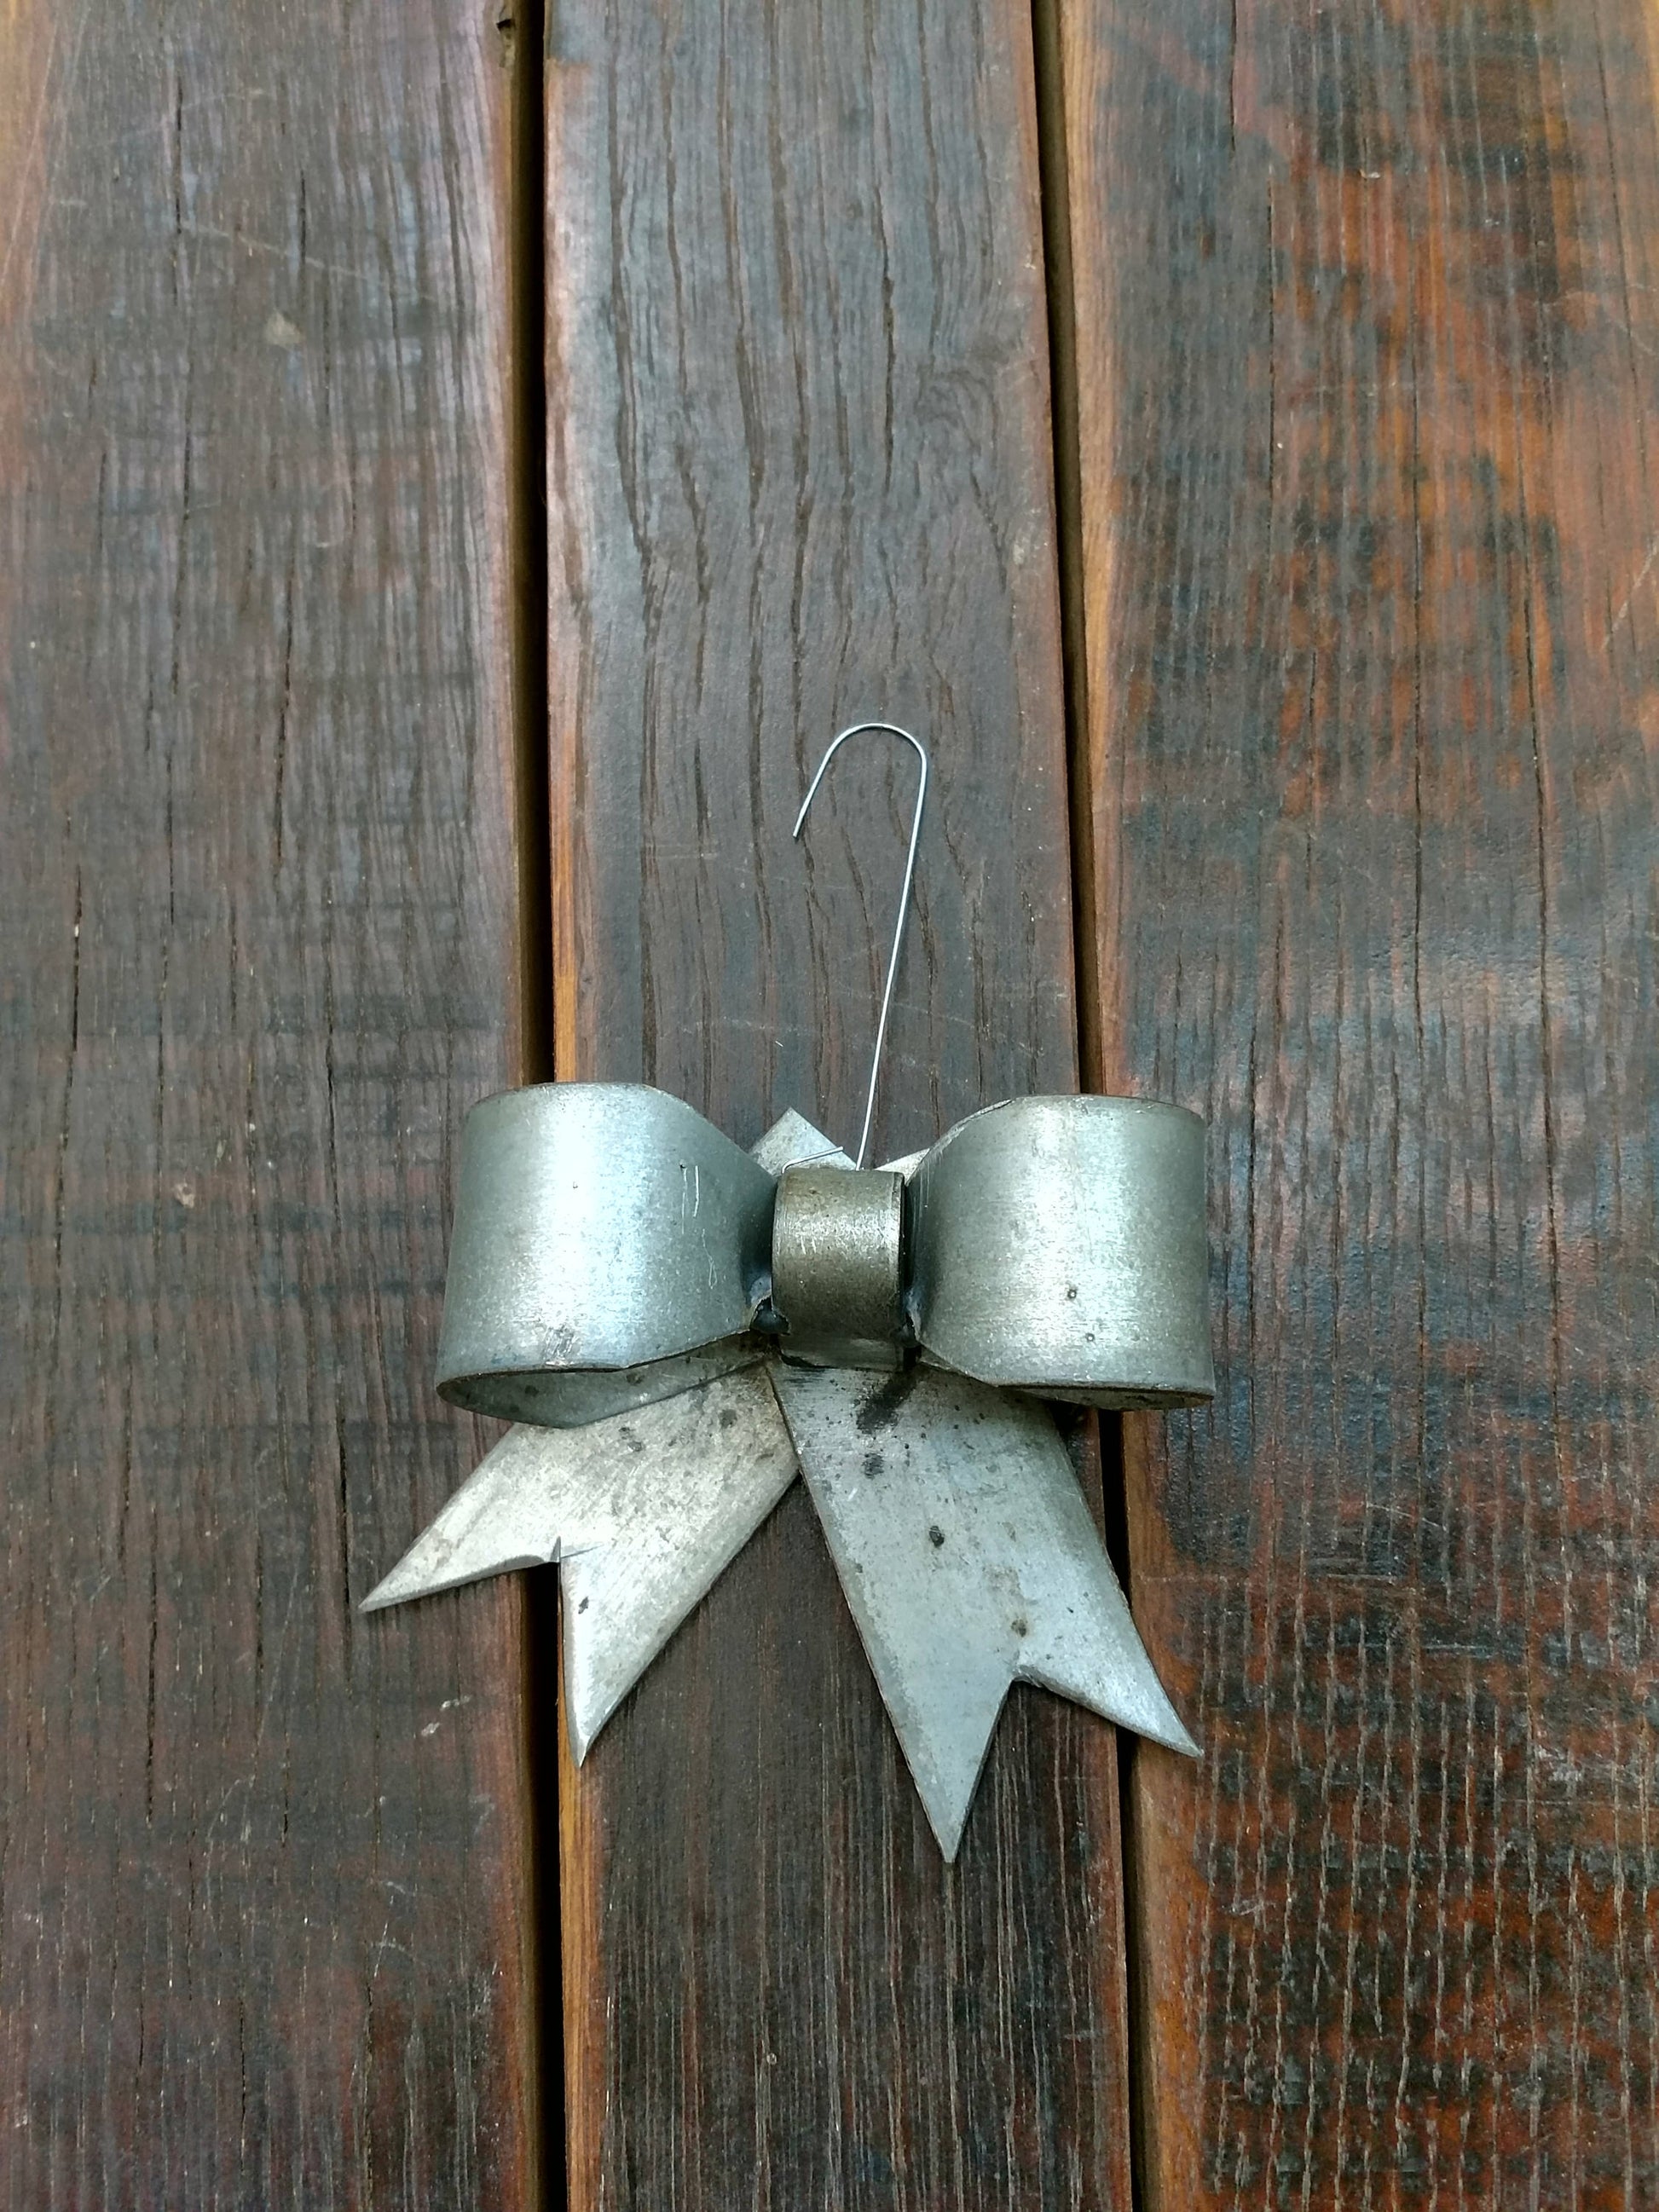 Wine Barrel Ring Bow Ornament - Jousi - Made from retired California wine barrel rings. 100% Recycled!